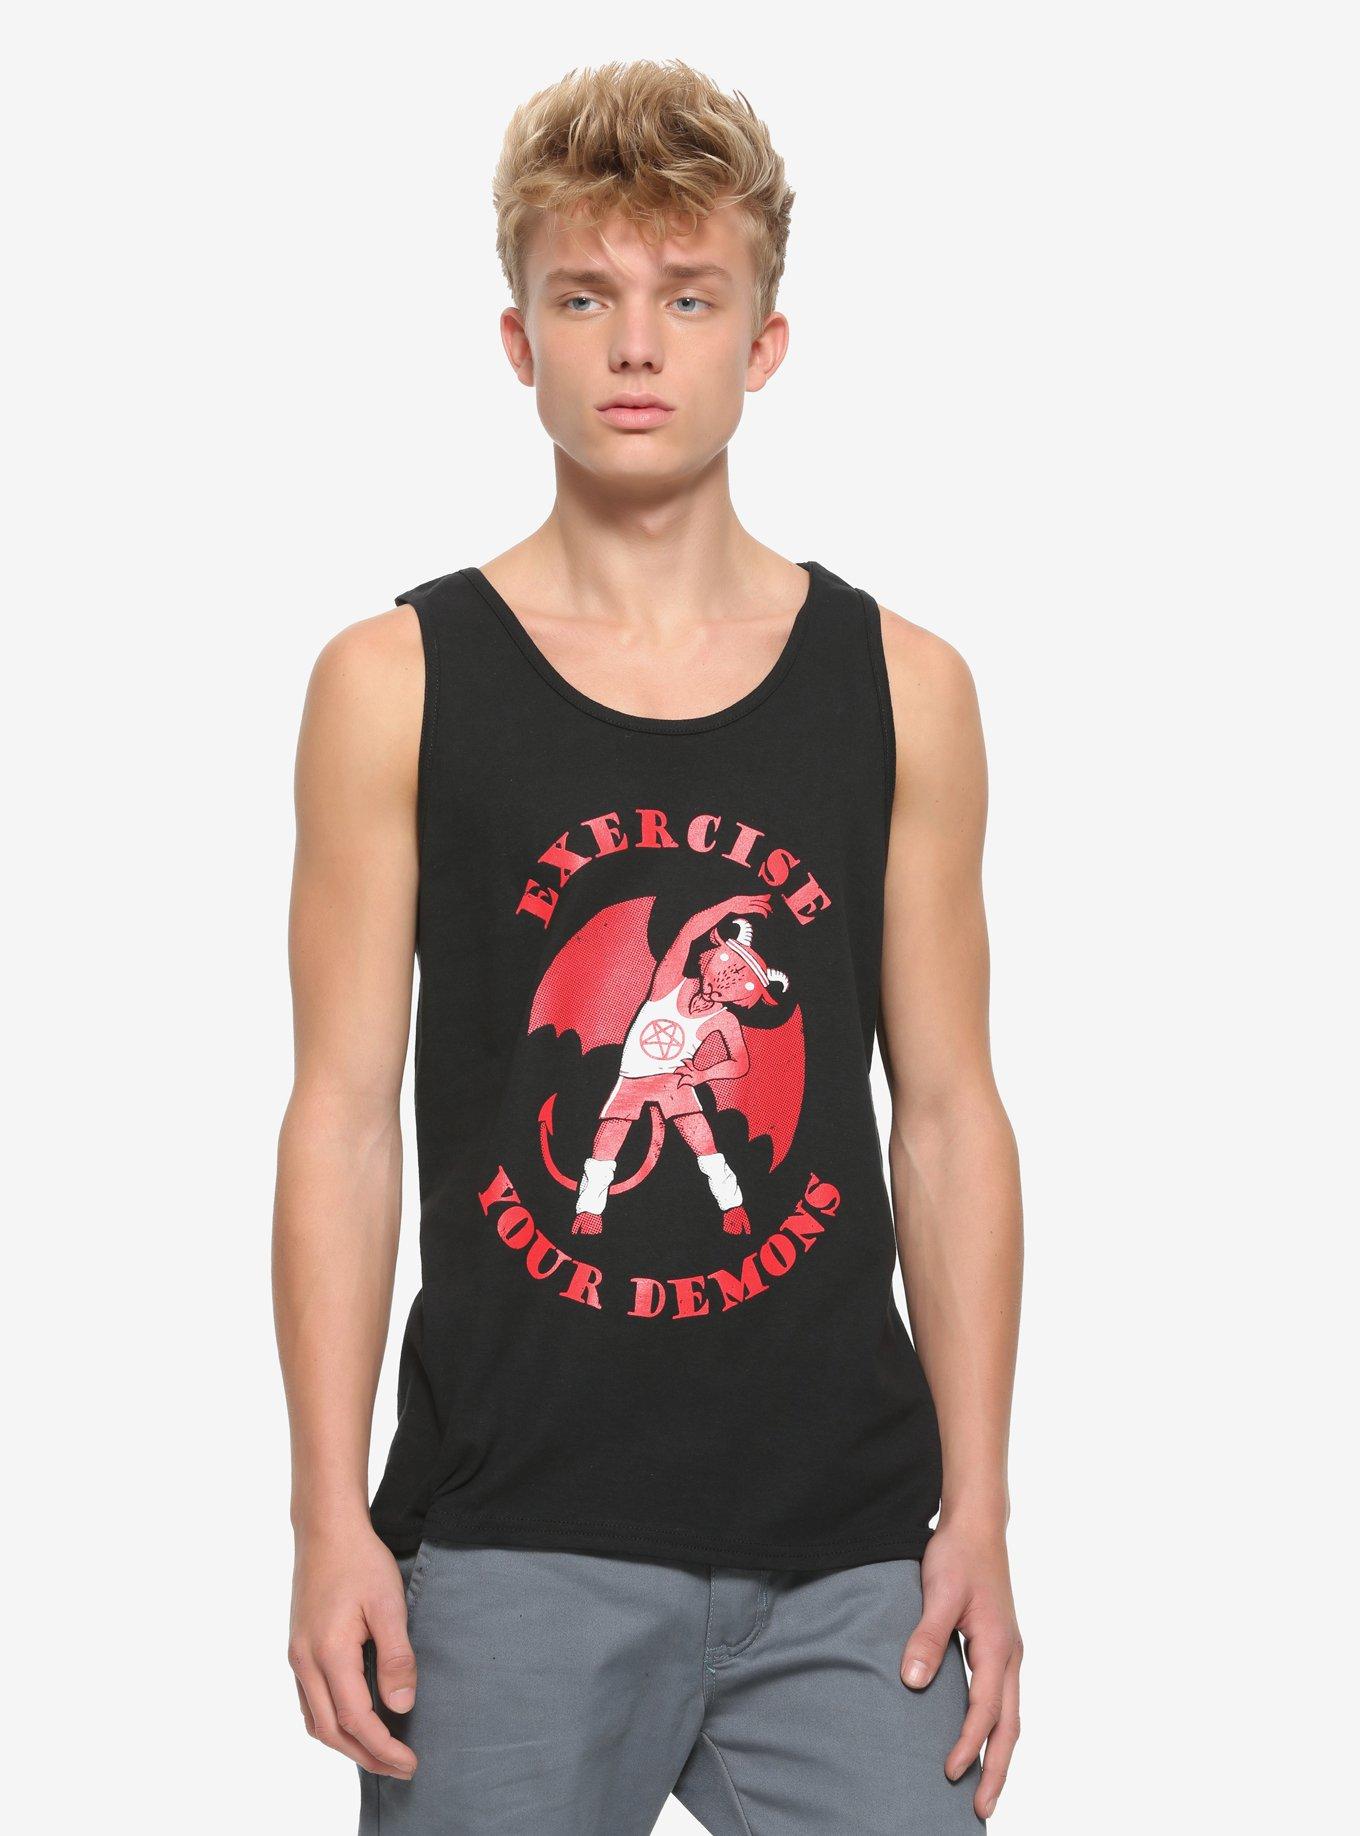 Exercise Your Demons Tank Top By Micheal Buxton, BLACK, hi-res